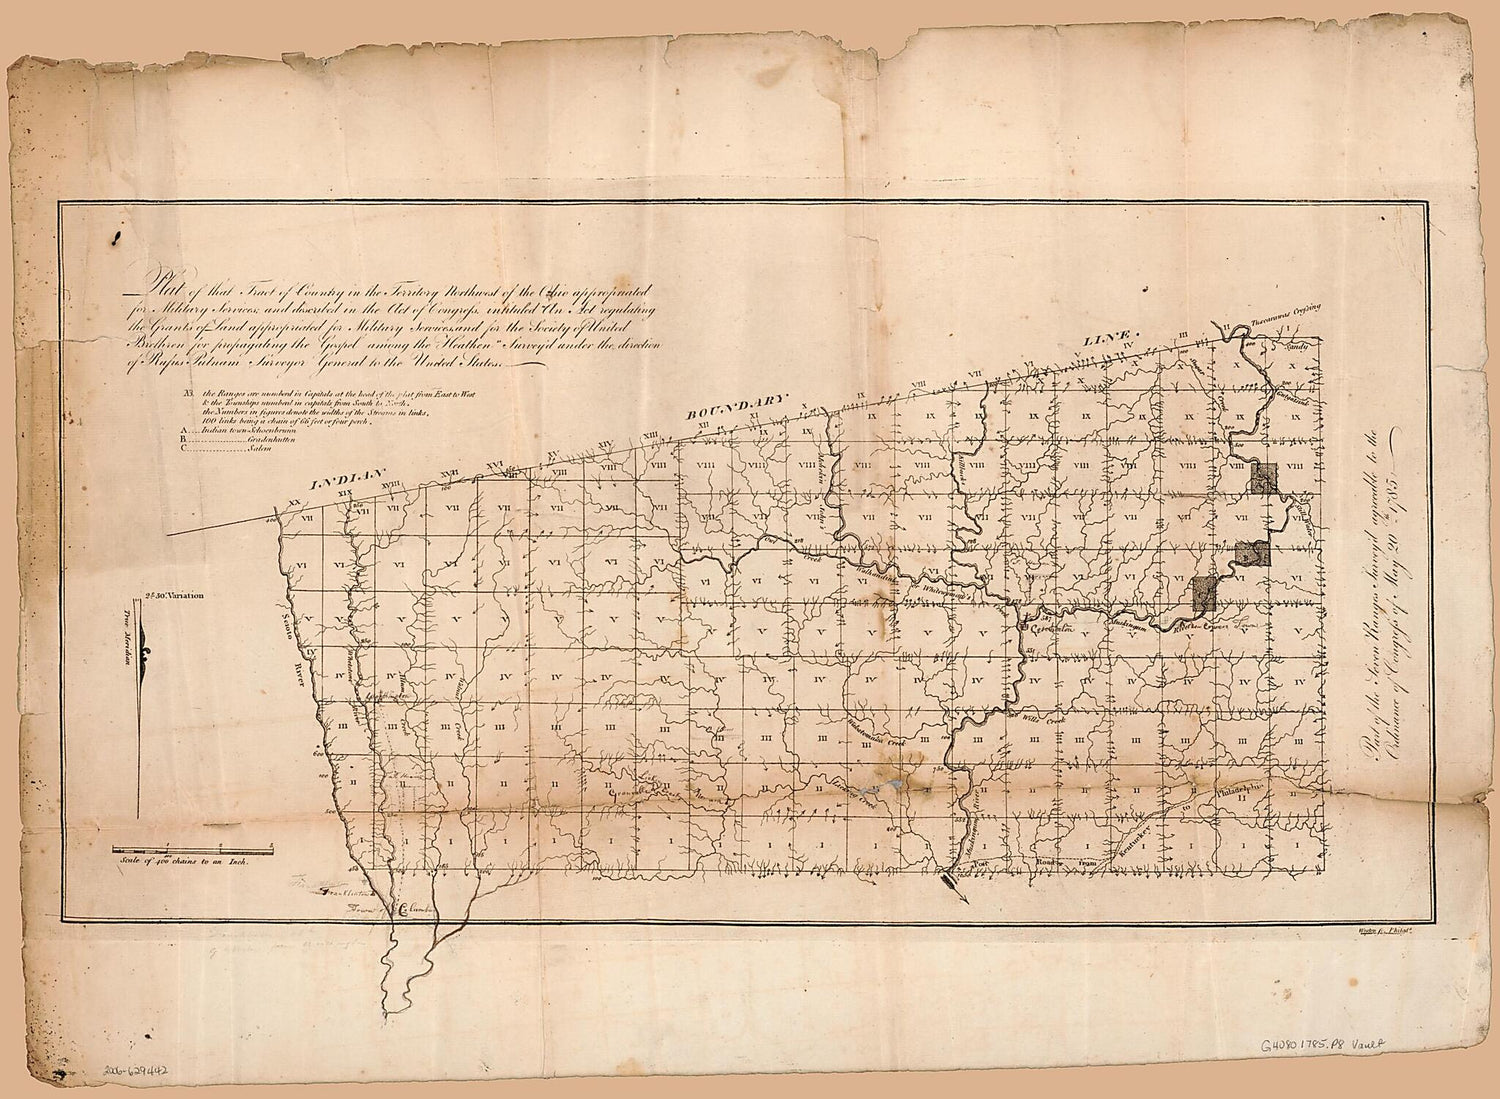 This old map of Plat of That Tract of Country In the Territory Northwest of the Ohio Appropriated for Military Services and Described In the Act of Congress Intitled An Act Regulating the Grants of Land Appropriated for Military Services and for the Soci